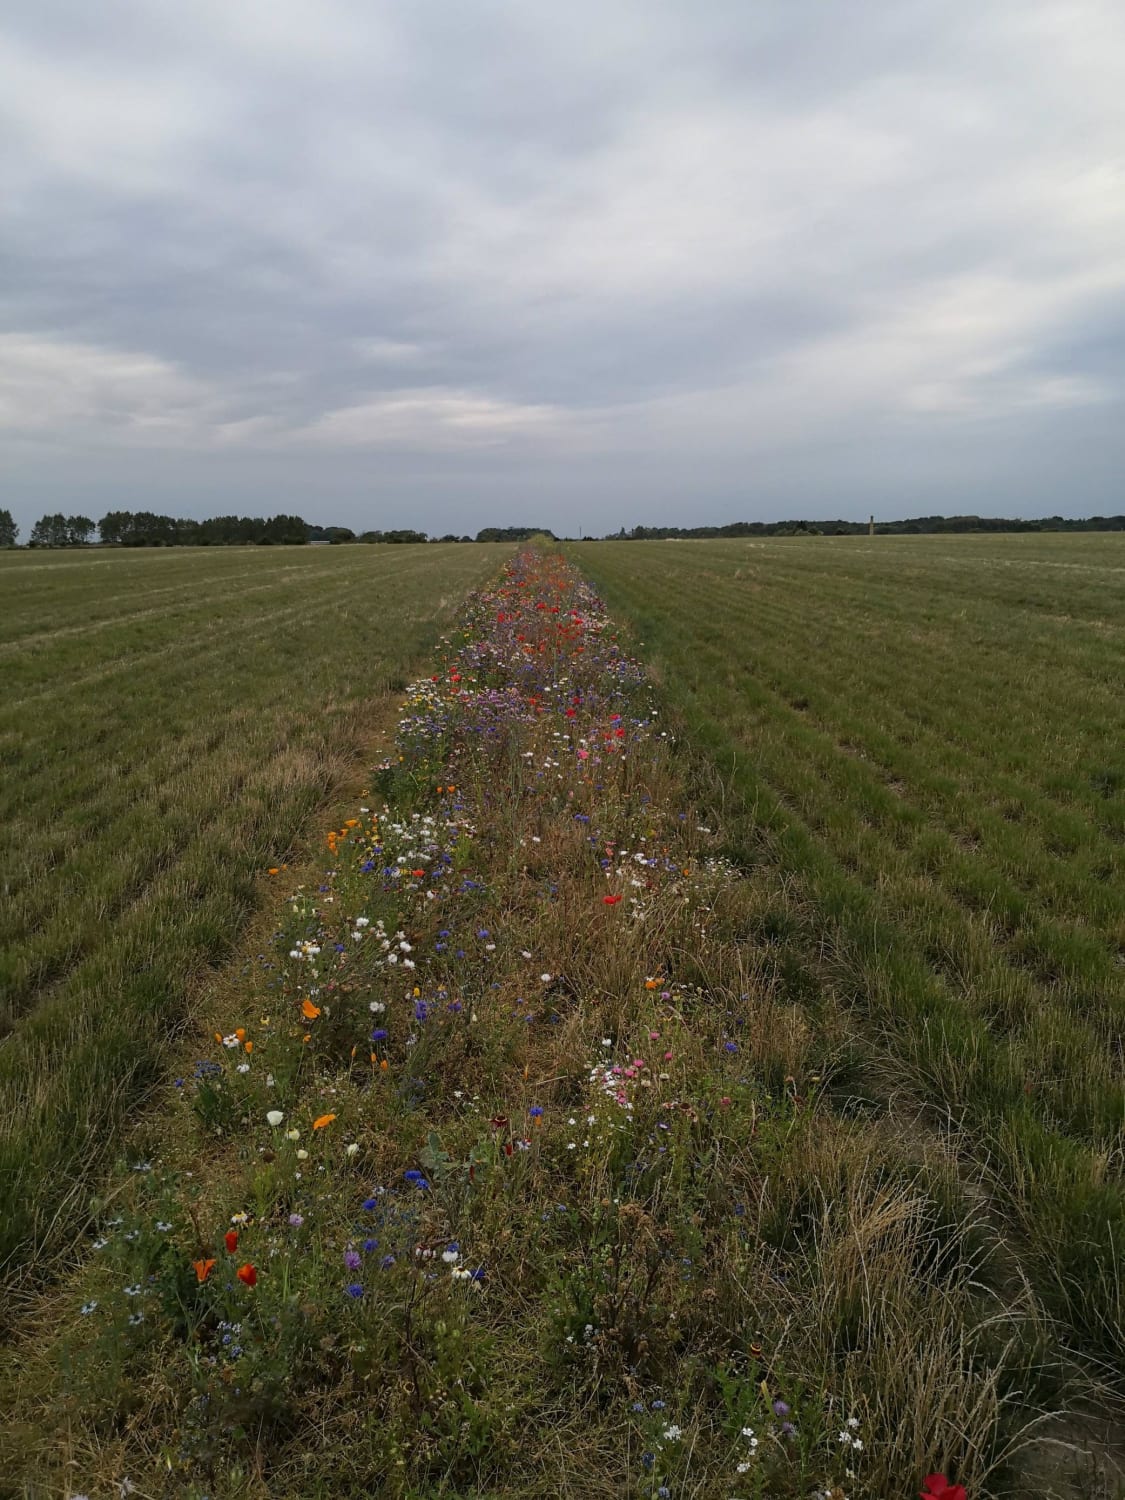 Our local farmers have established so-called "flora belts" for the bees in their fields (Funen, Denmark).